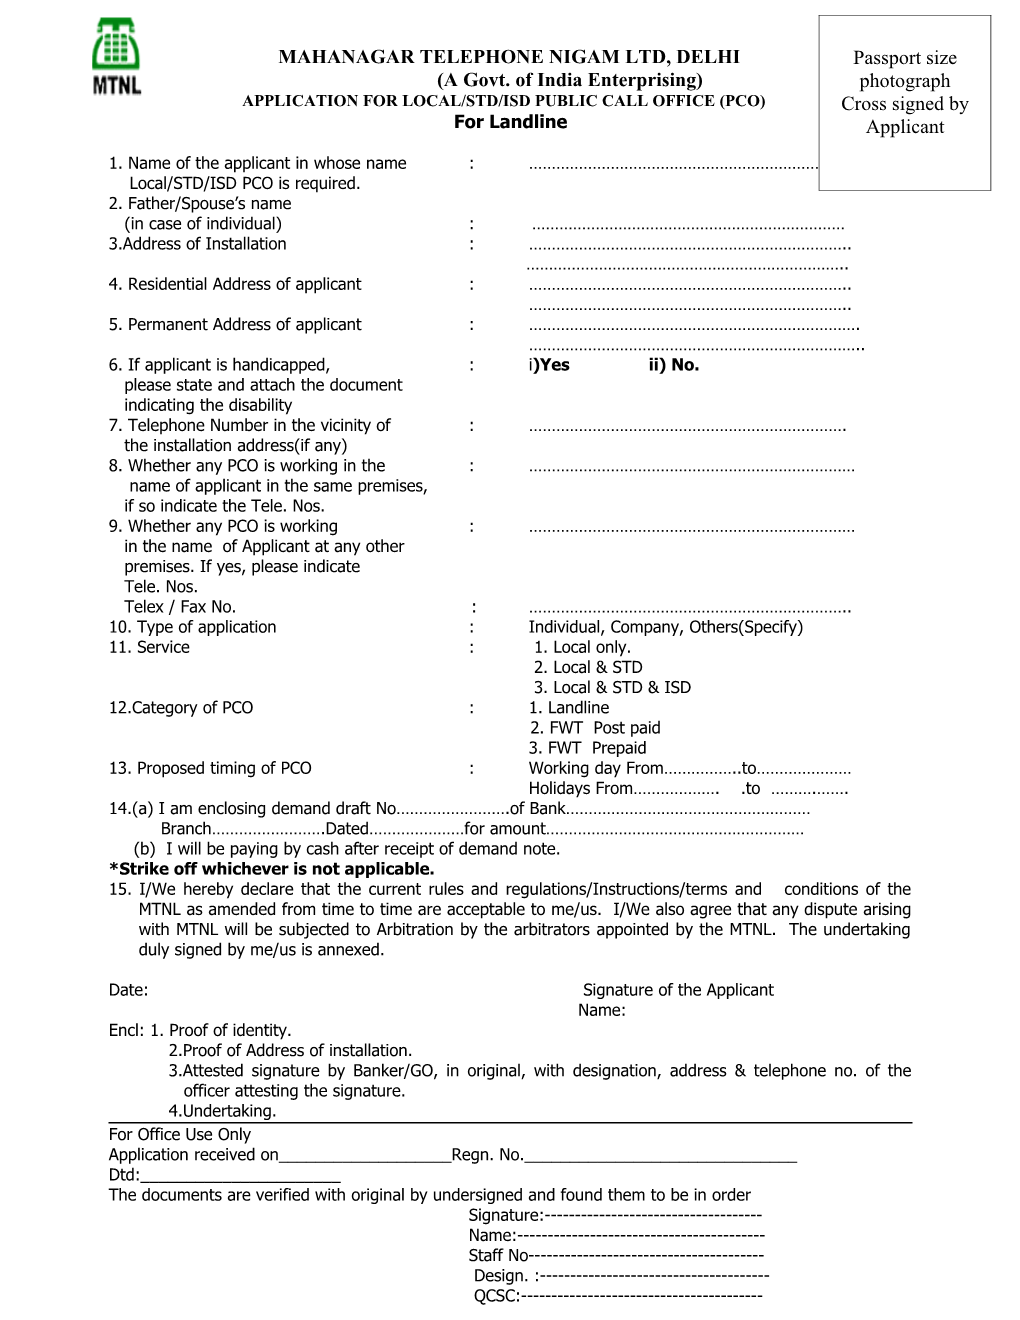 Application for Local/Std/Isd Public Call Office (Pco)